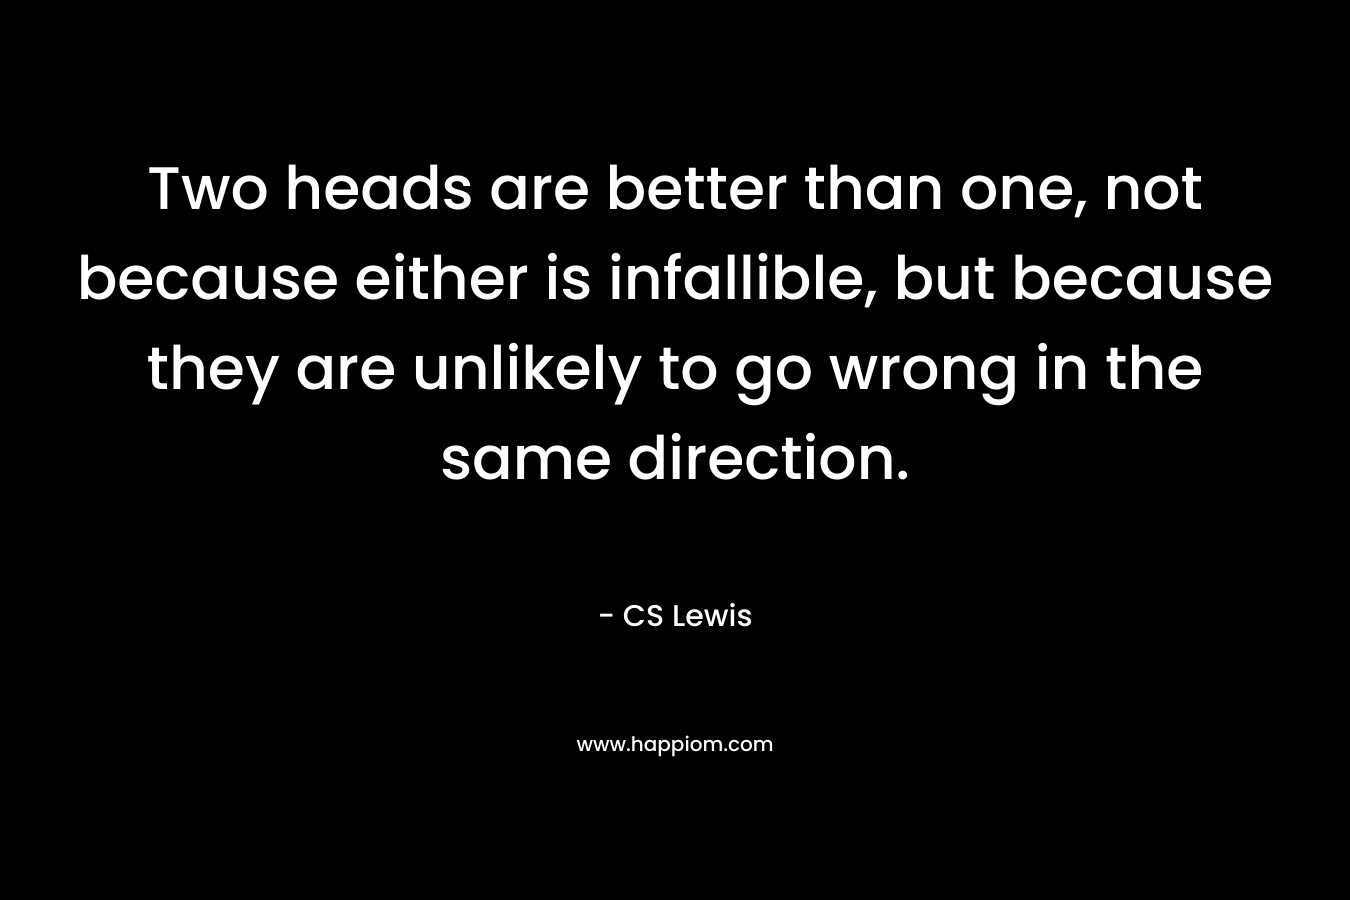 Two heads are better than one, not because either is infallible, but because they are unlikely to go wrong in the same direction. – CS Lewis